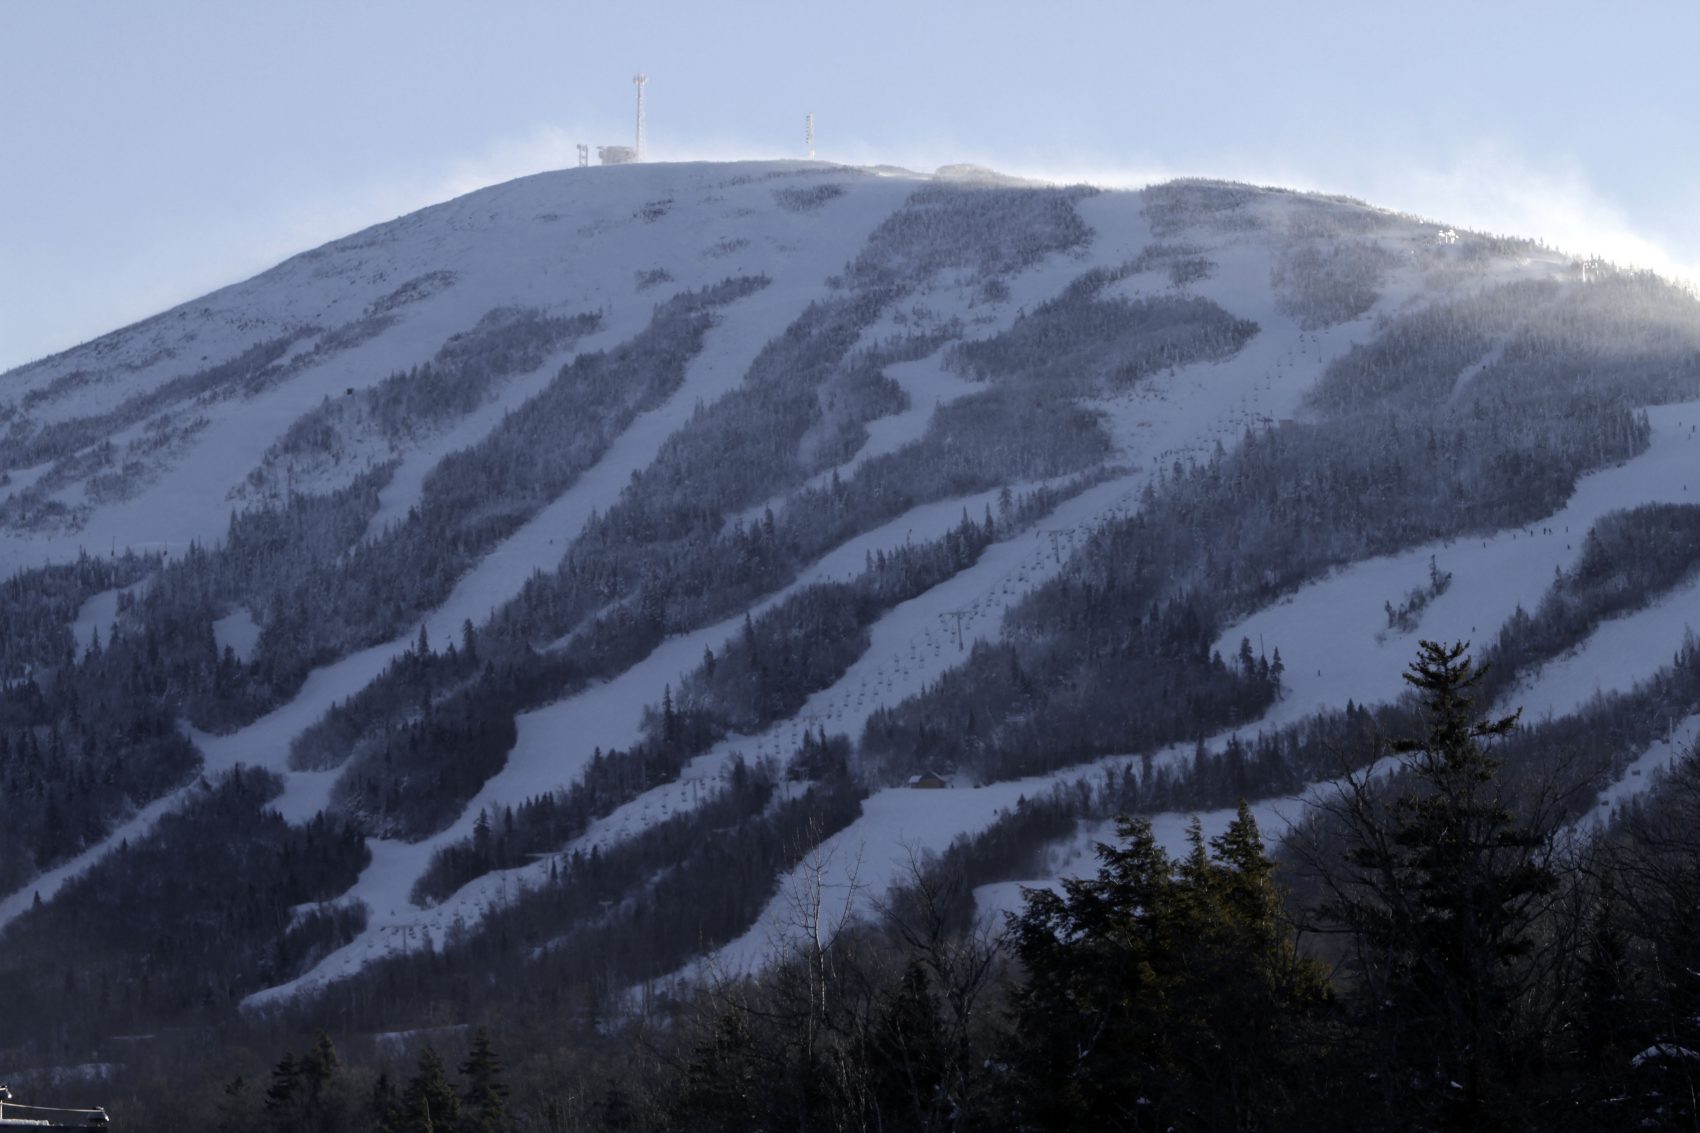 Sugarloaf mountain in Carrabasset Valley, Maine, is seen on Dec. 28, 2010. (Pat Wellenbach/AP)